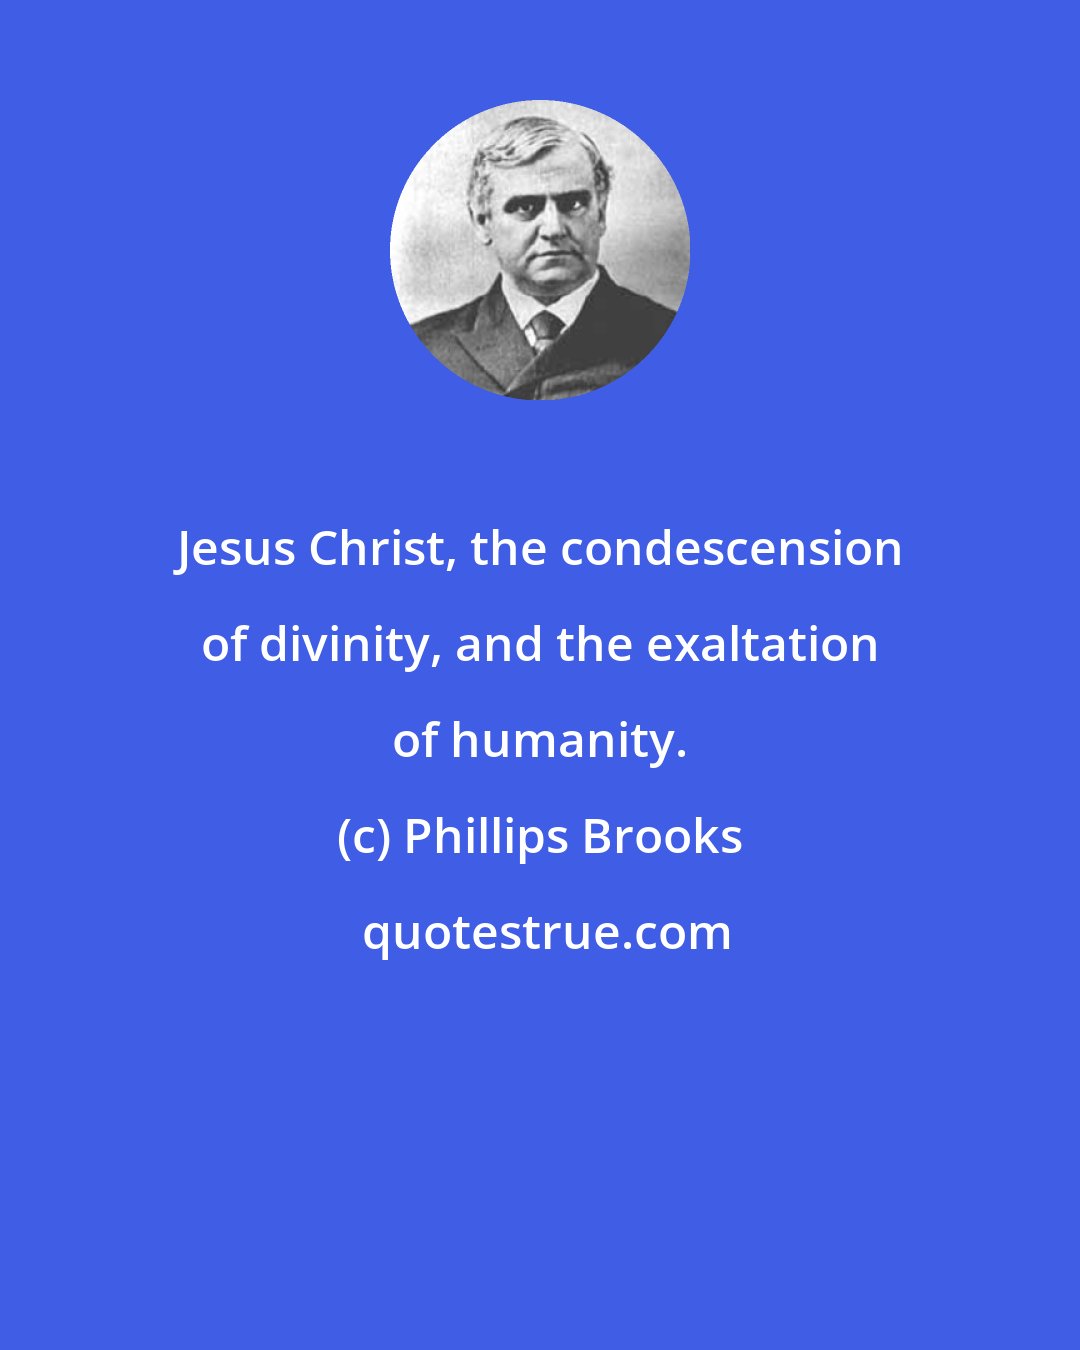 Phillips Brooks: Jesus Christ, the condescension of divinity, and the exaltation of humanity.